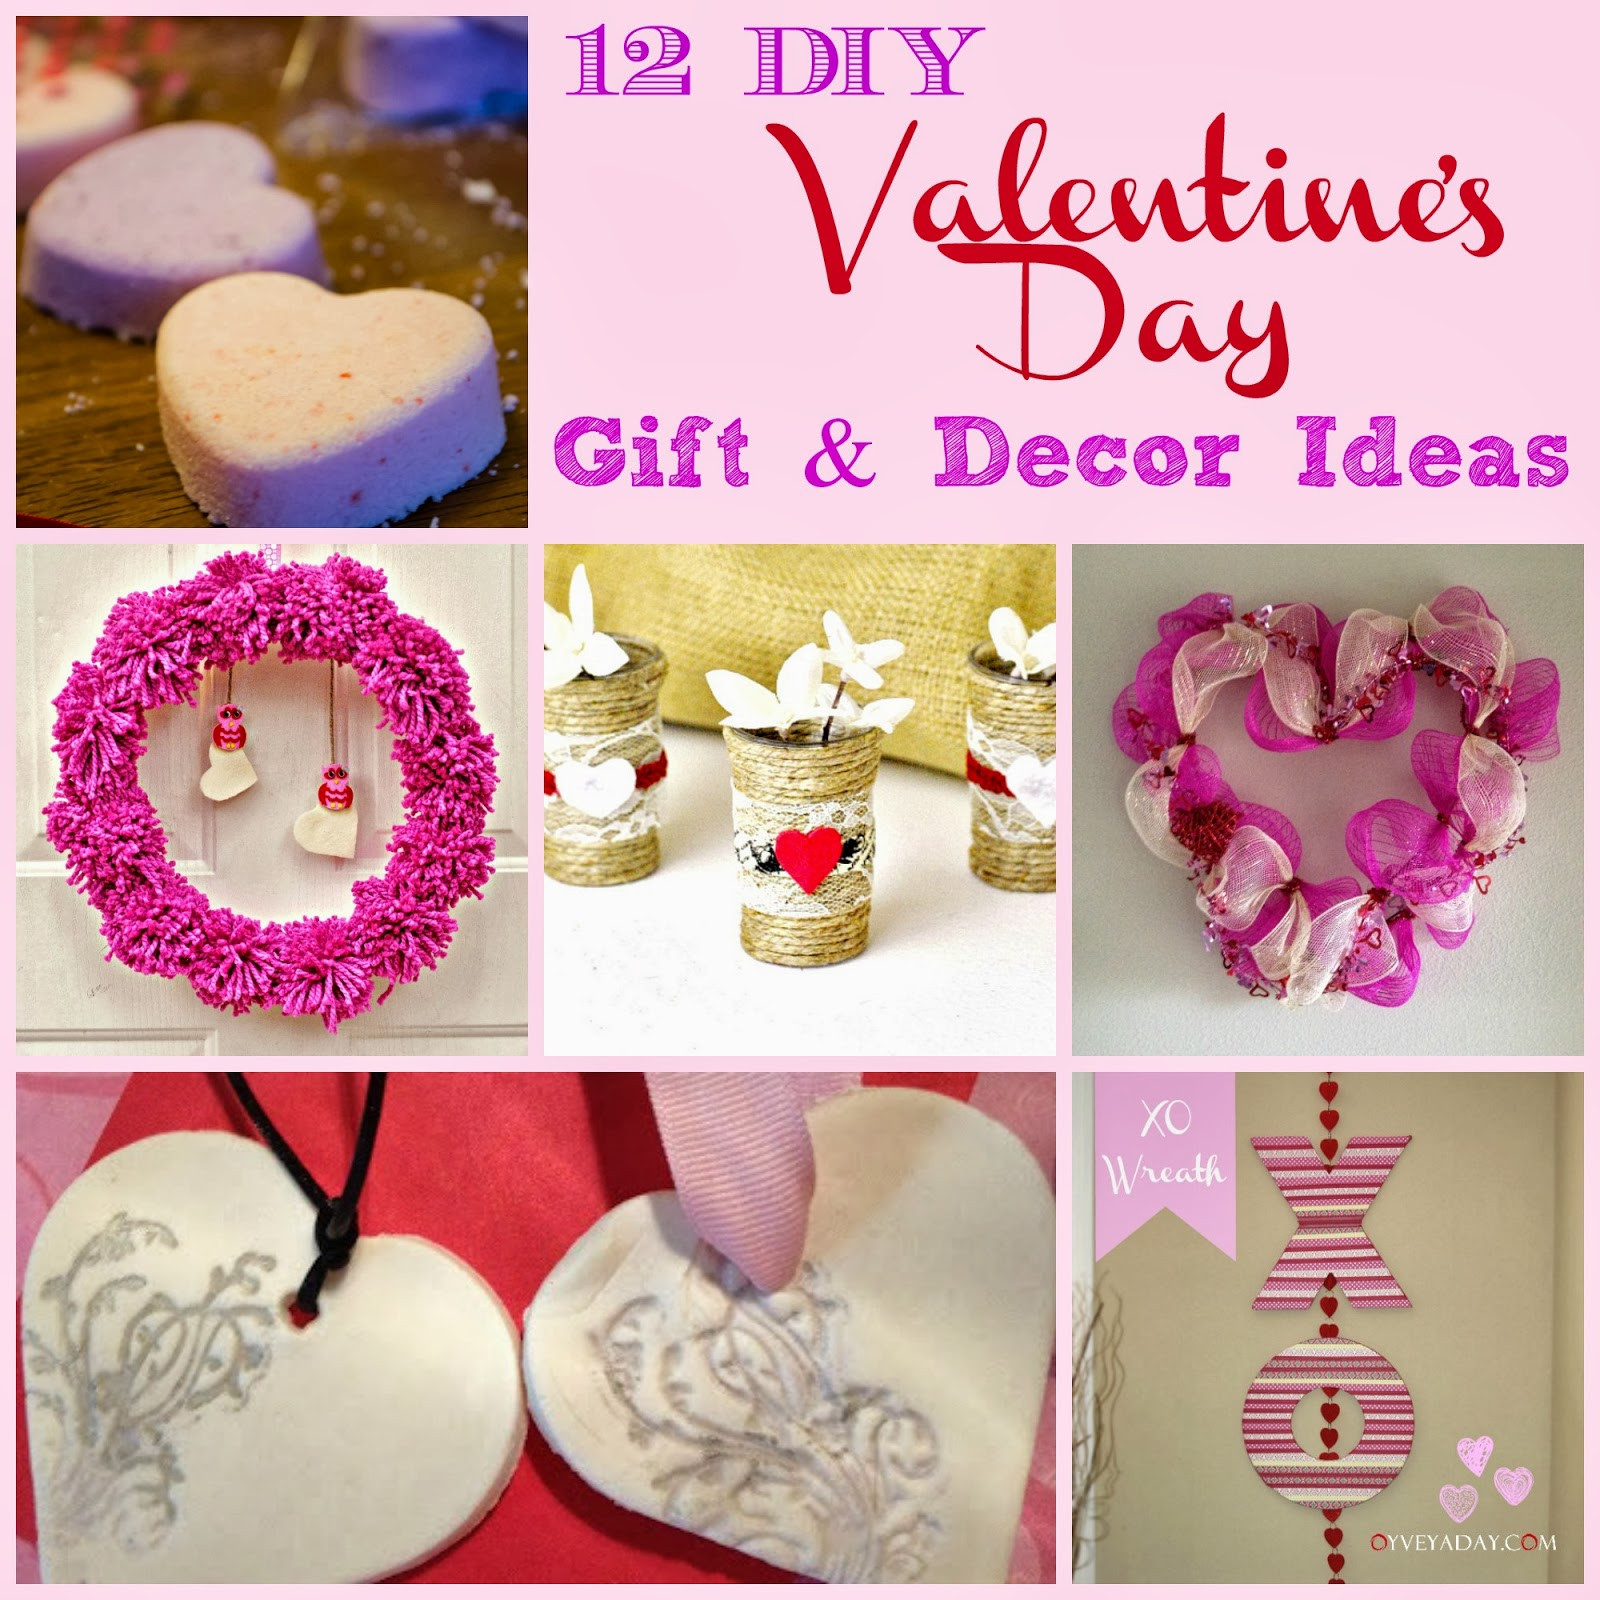 Valentine'S Day Handmade Gift Ideas
 12 DIY Valentine s Day Gift & Decor Ideas Outnumbered 3 to 1